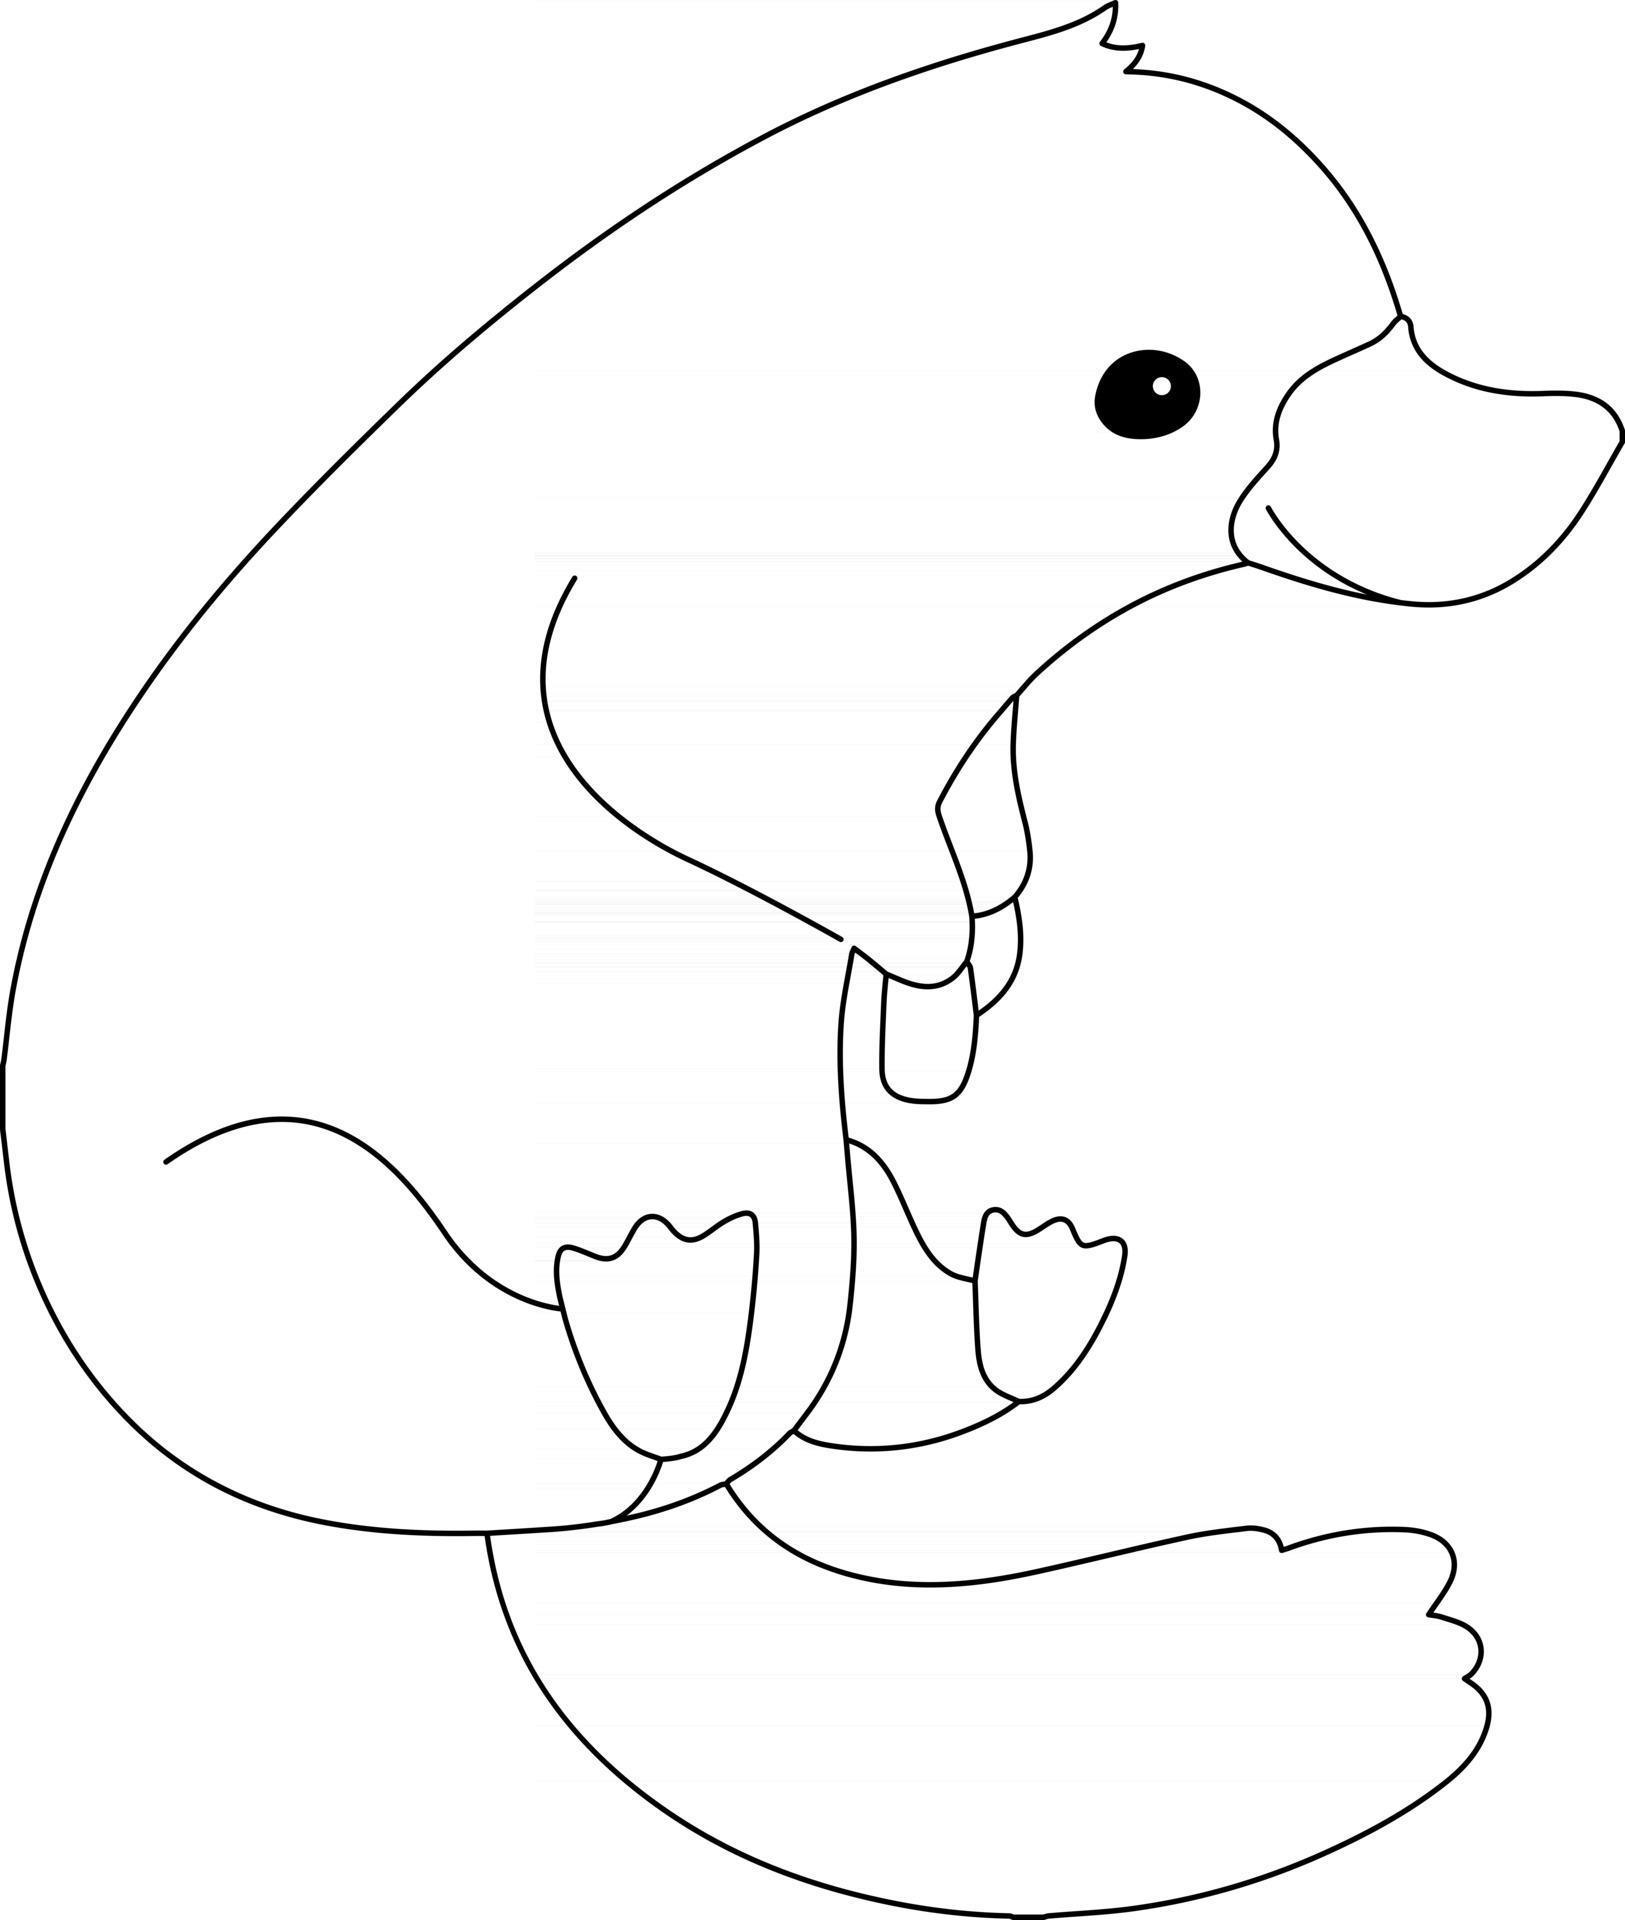 Platypus Kids Coloring Page Great for Beginner Coloring Book 2515861